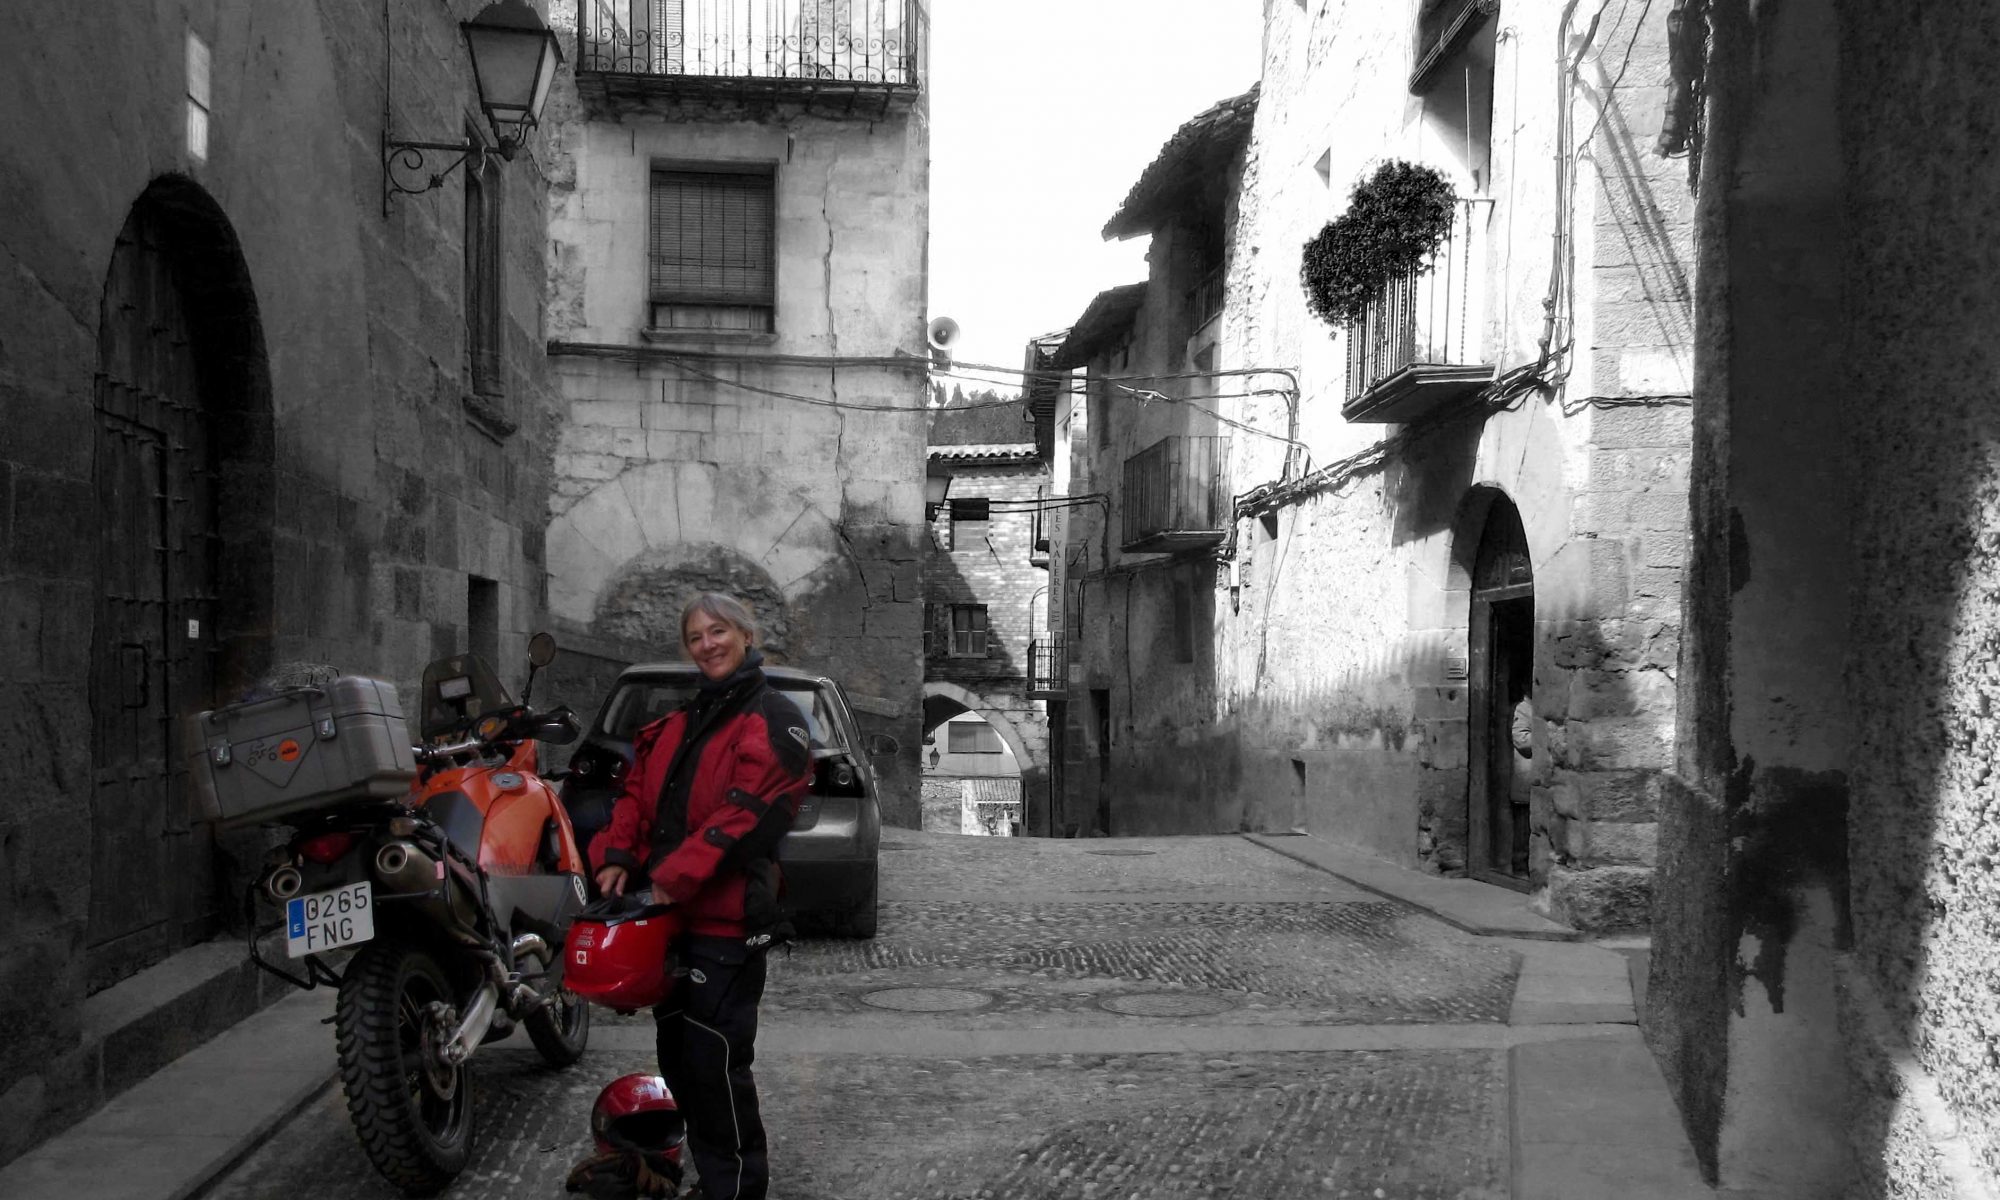 Susan Forest on a motorcycle tour of Europe